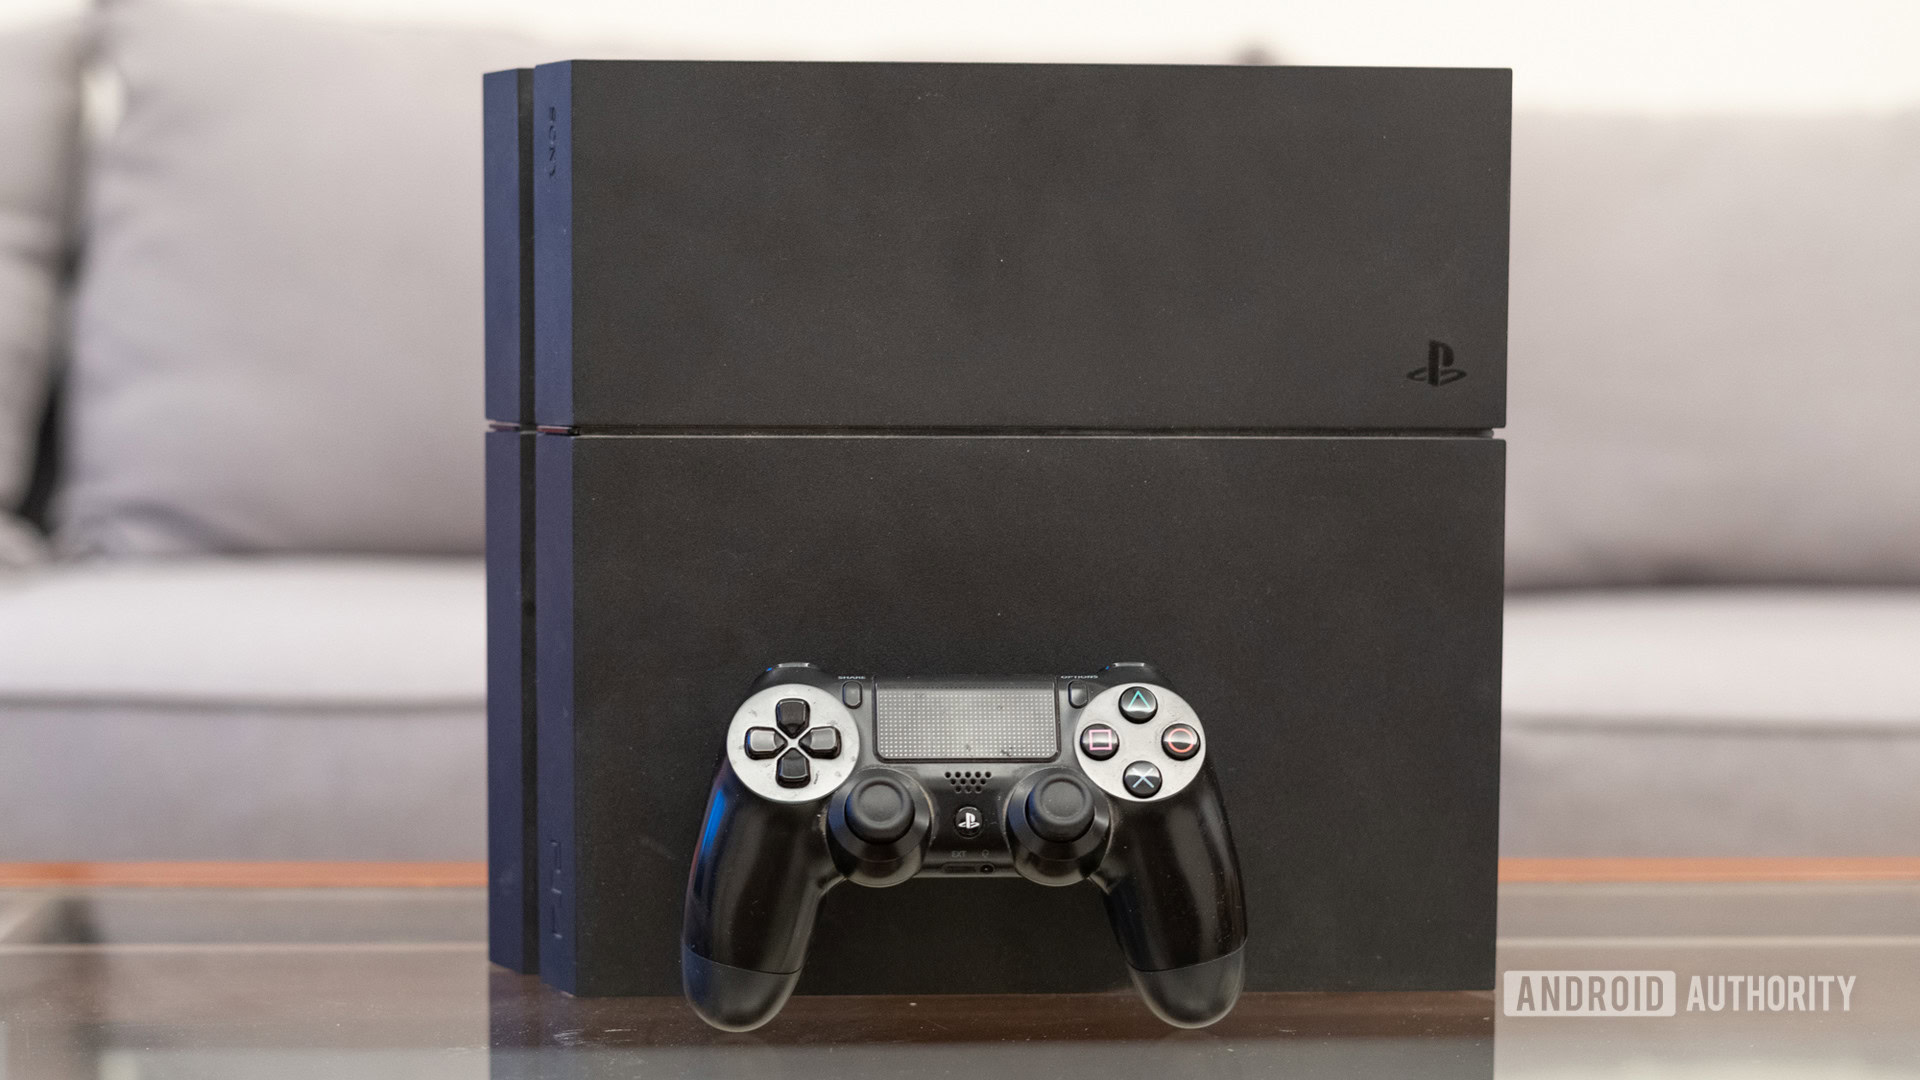 A guide to PlayStation consoles: Everything you need to know